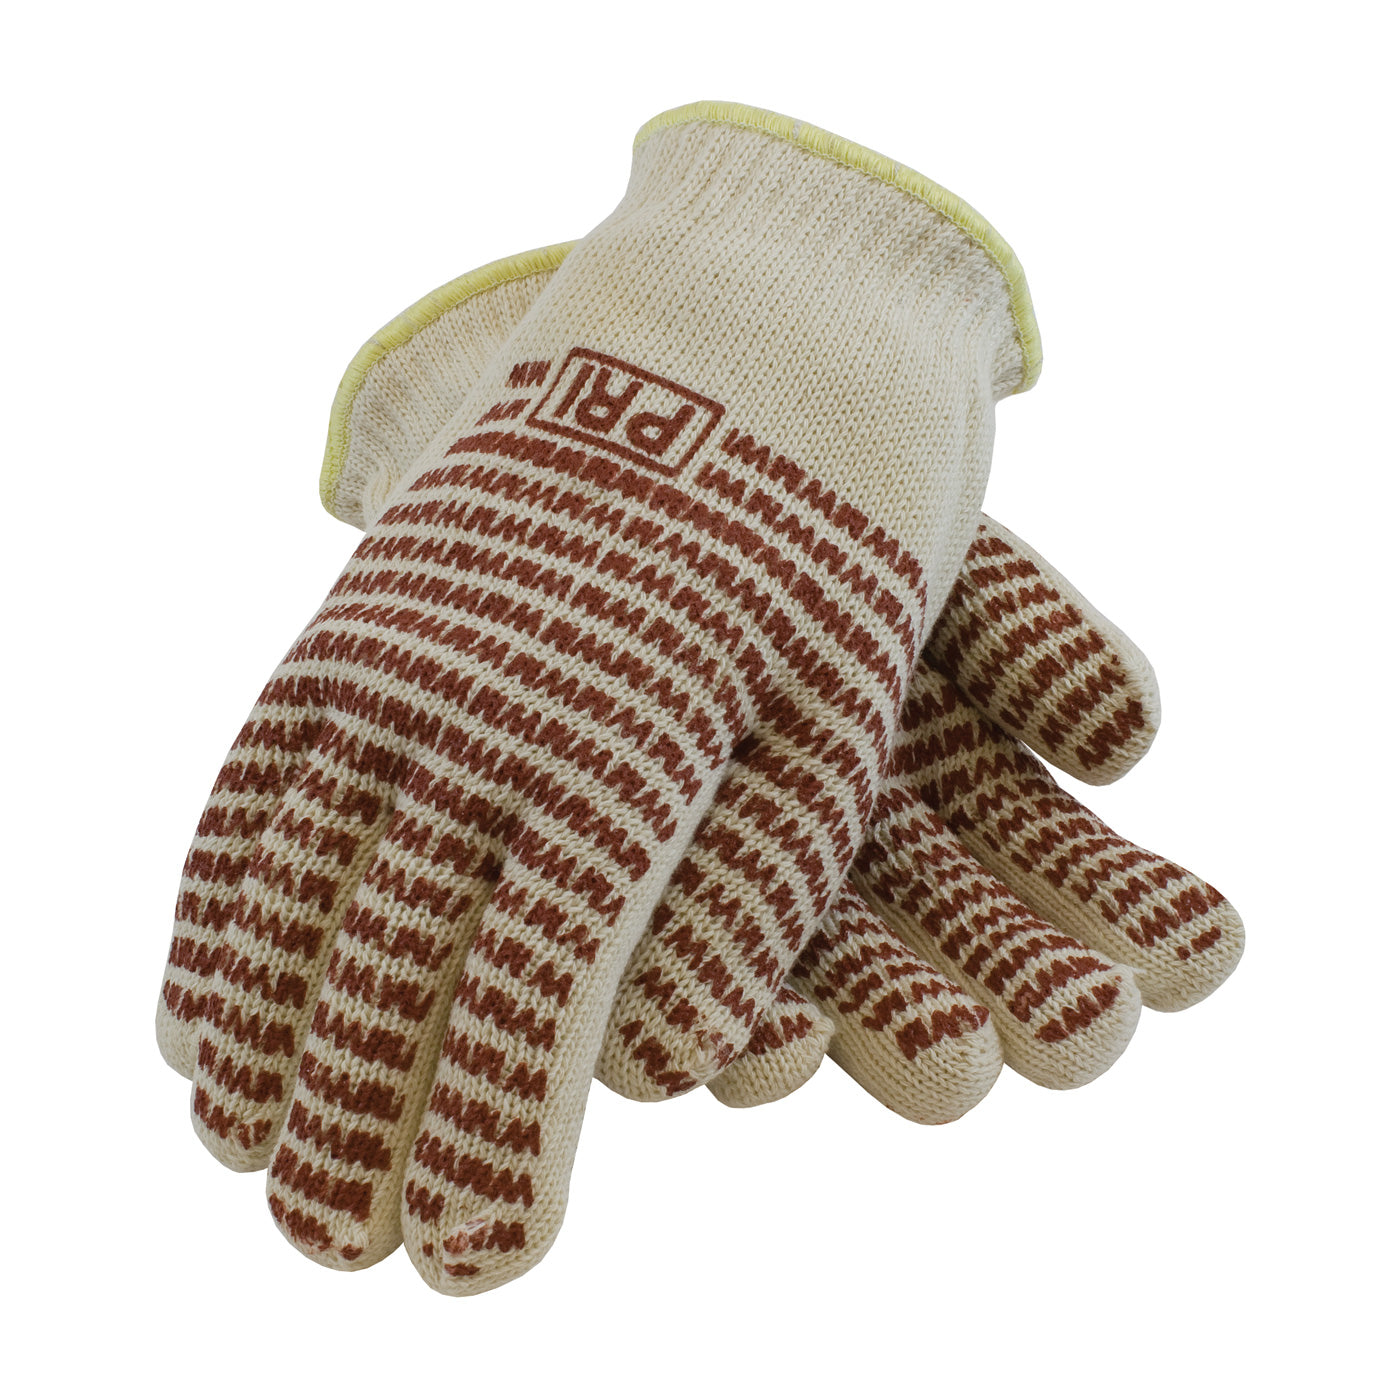 PIP 43-502S Double-Layered Cotton Seamless Knit Hot Mill Glove with Double-Sided EverGrip Nitrile Coating - 24 oz